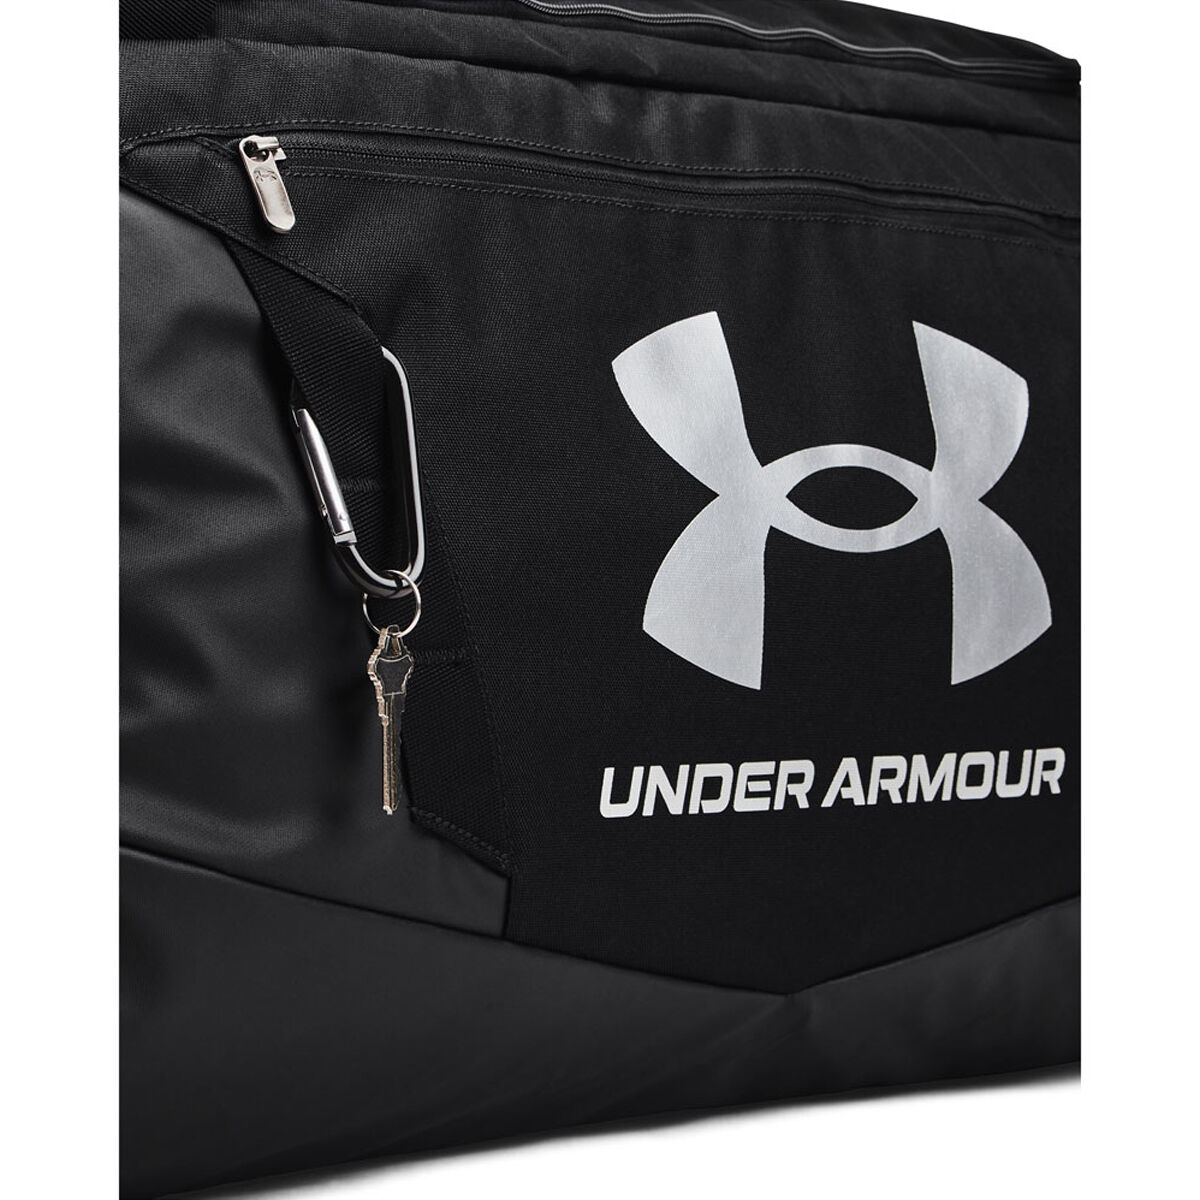 Under Armour Undeniable 5.0 XL duffle bag in black | ASOS